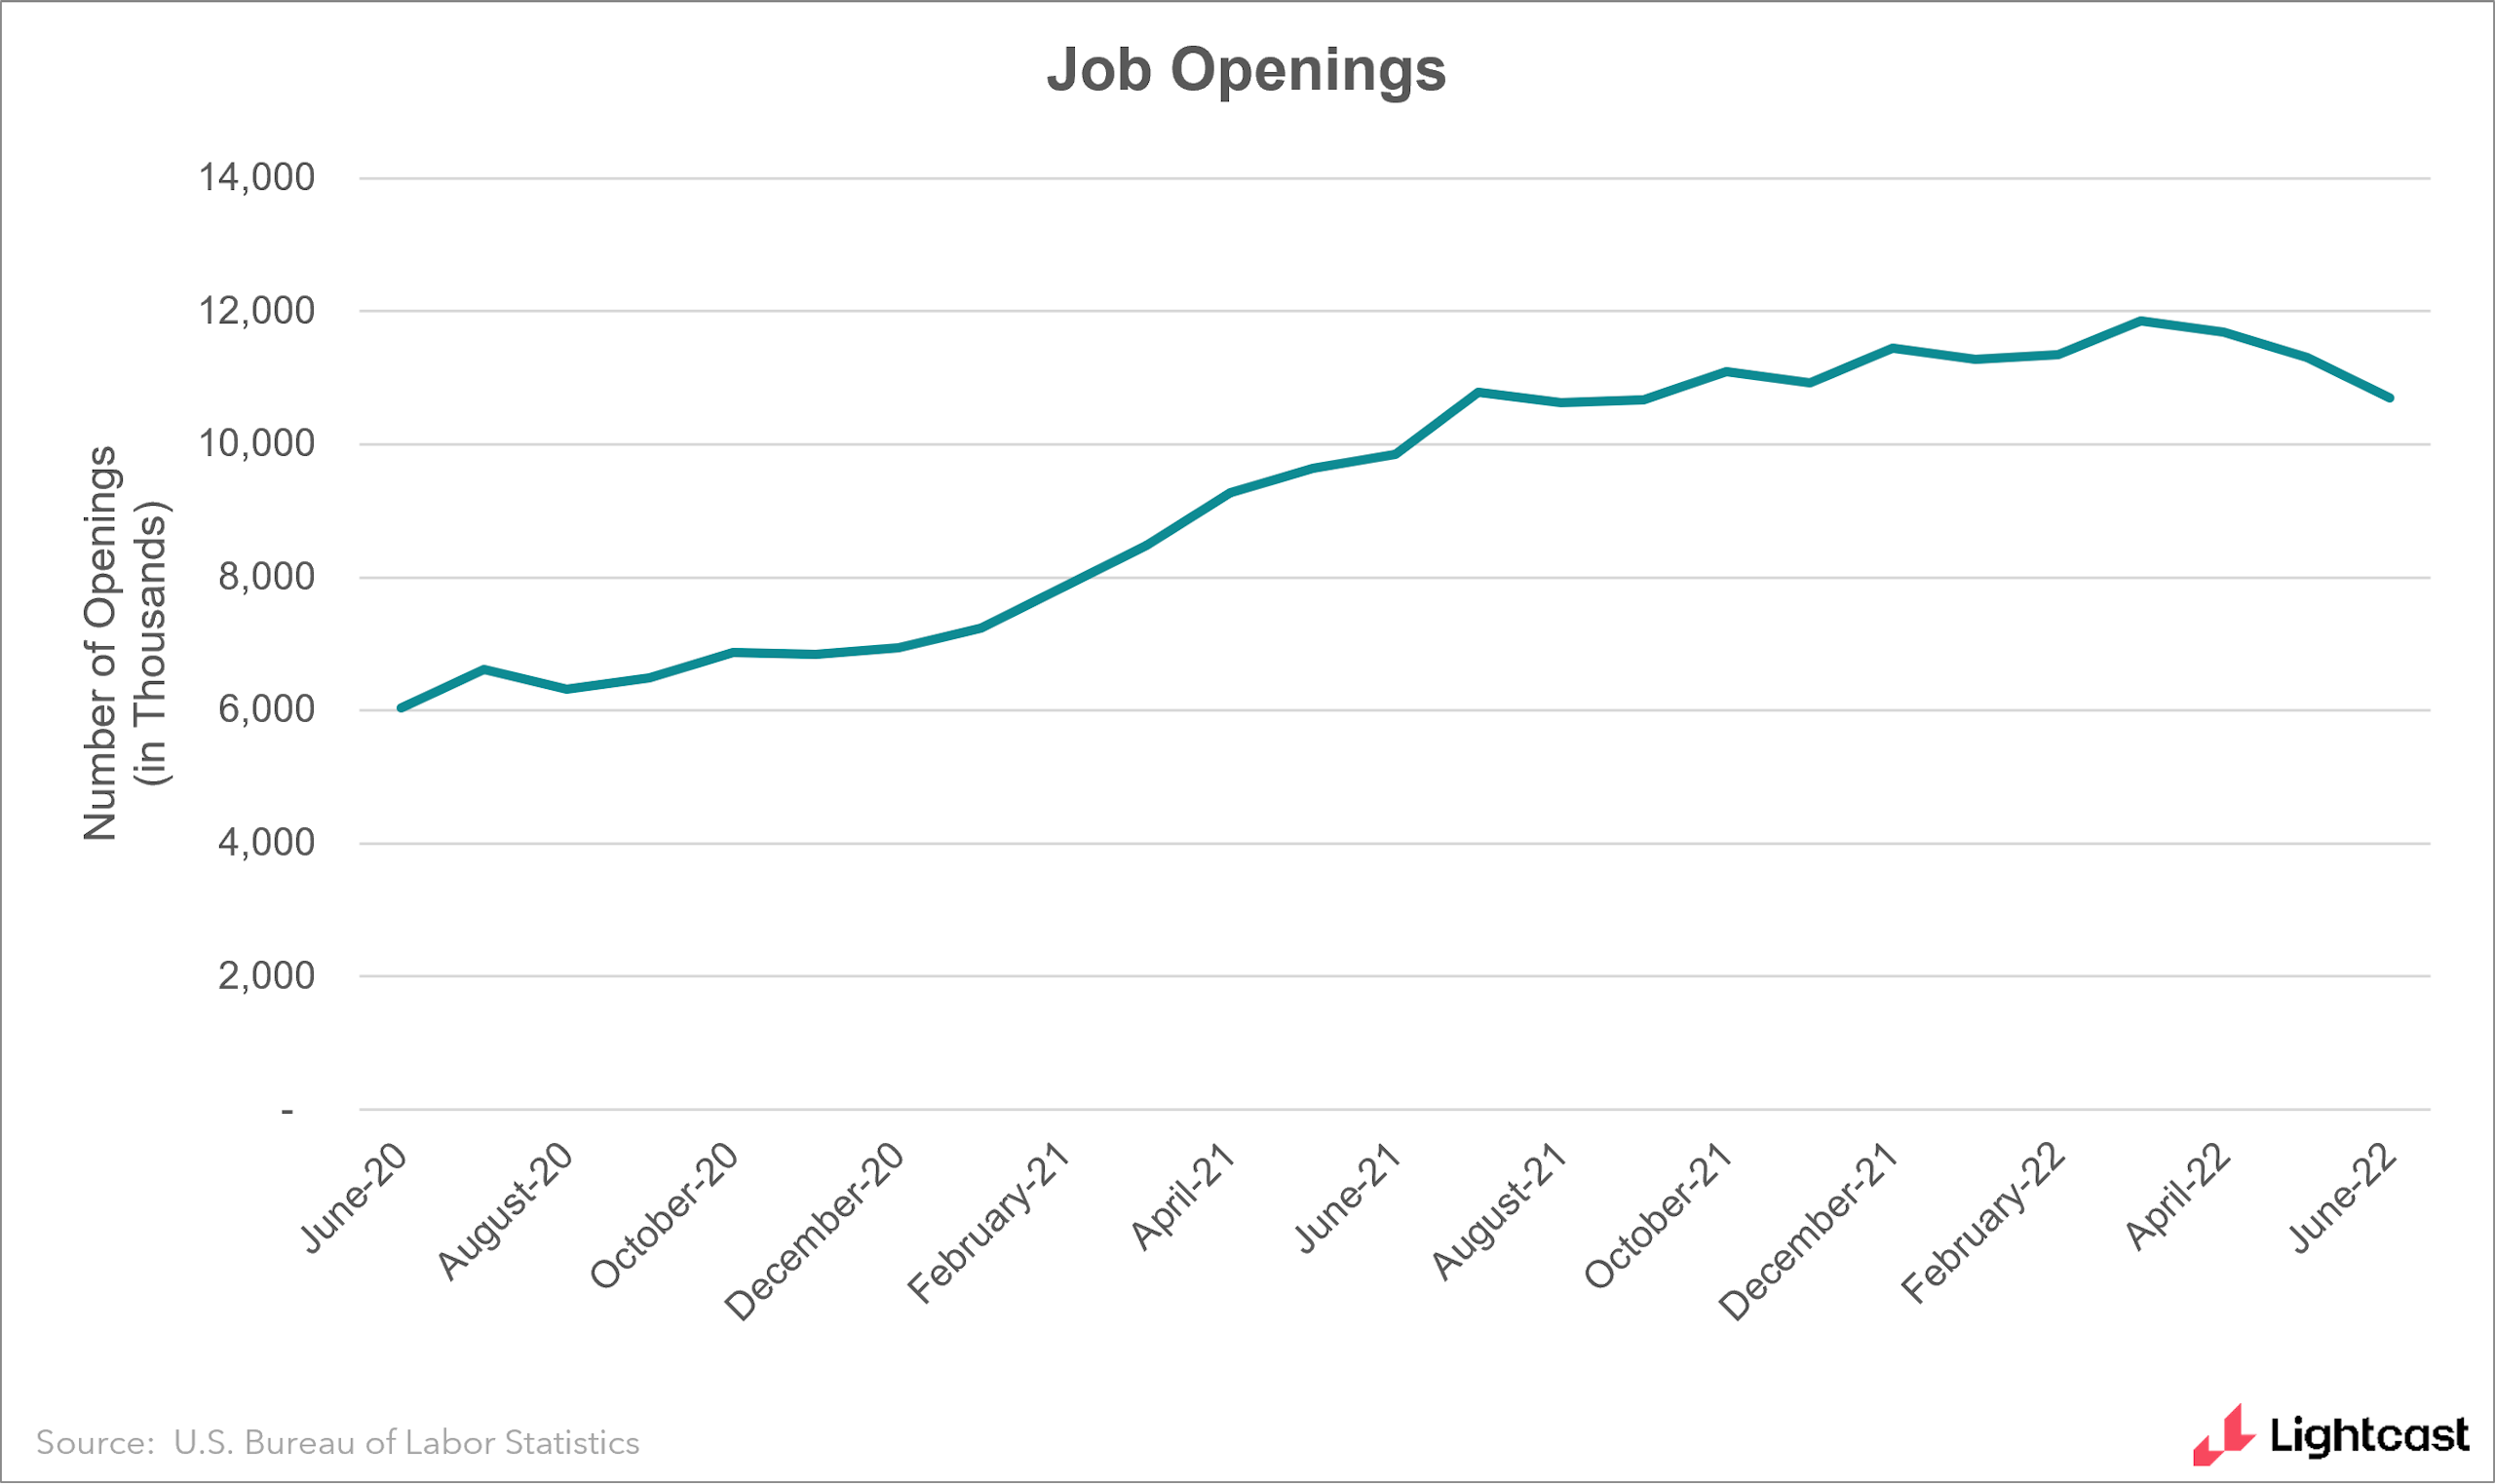 Graph showing job openings over the past two years, showing a steady increase but a slight decline over the past two months